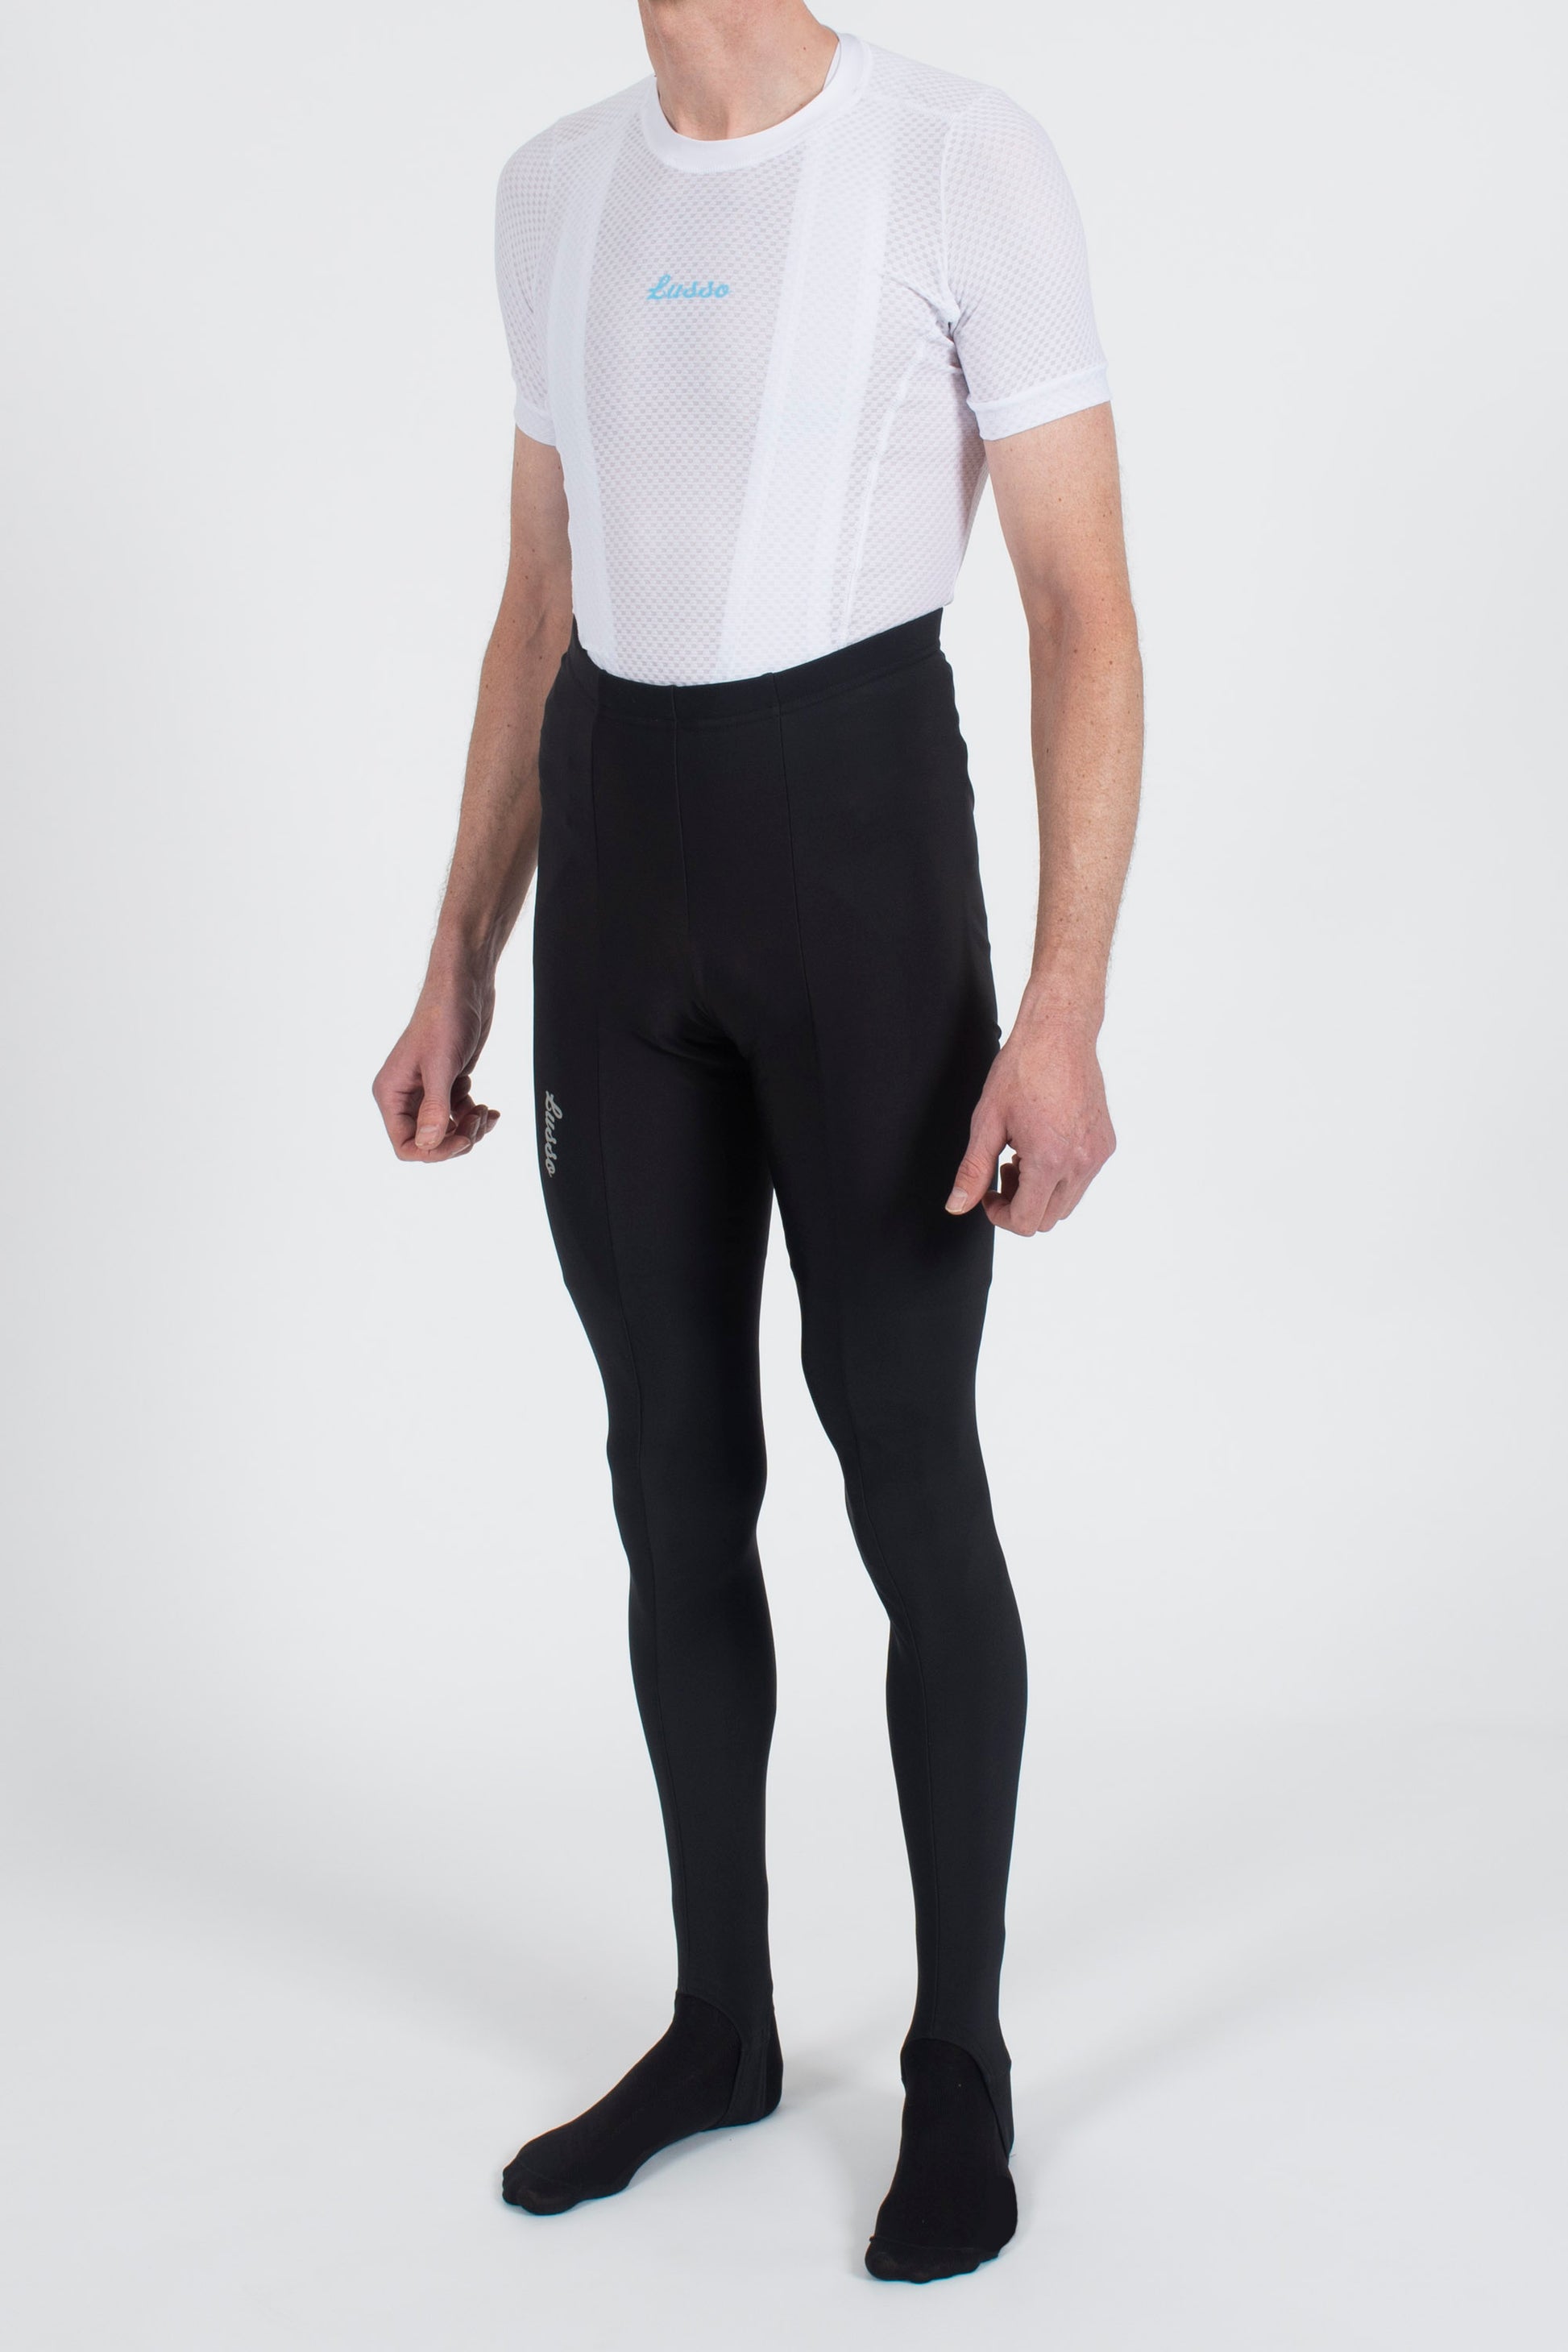 Cooltech Tights - Lusso Cycle Wear